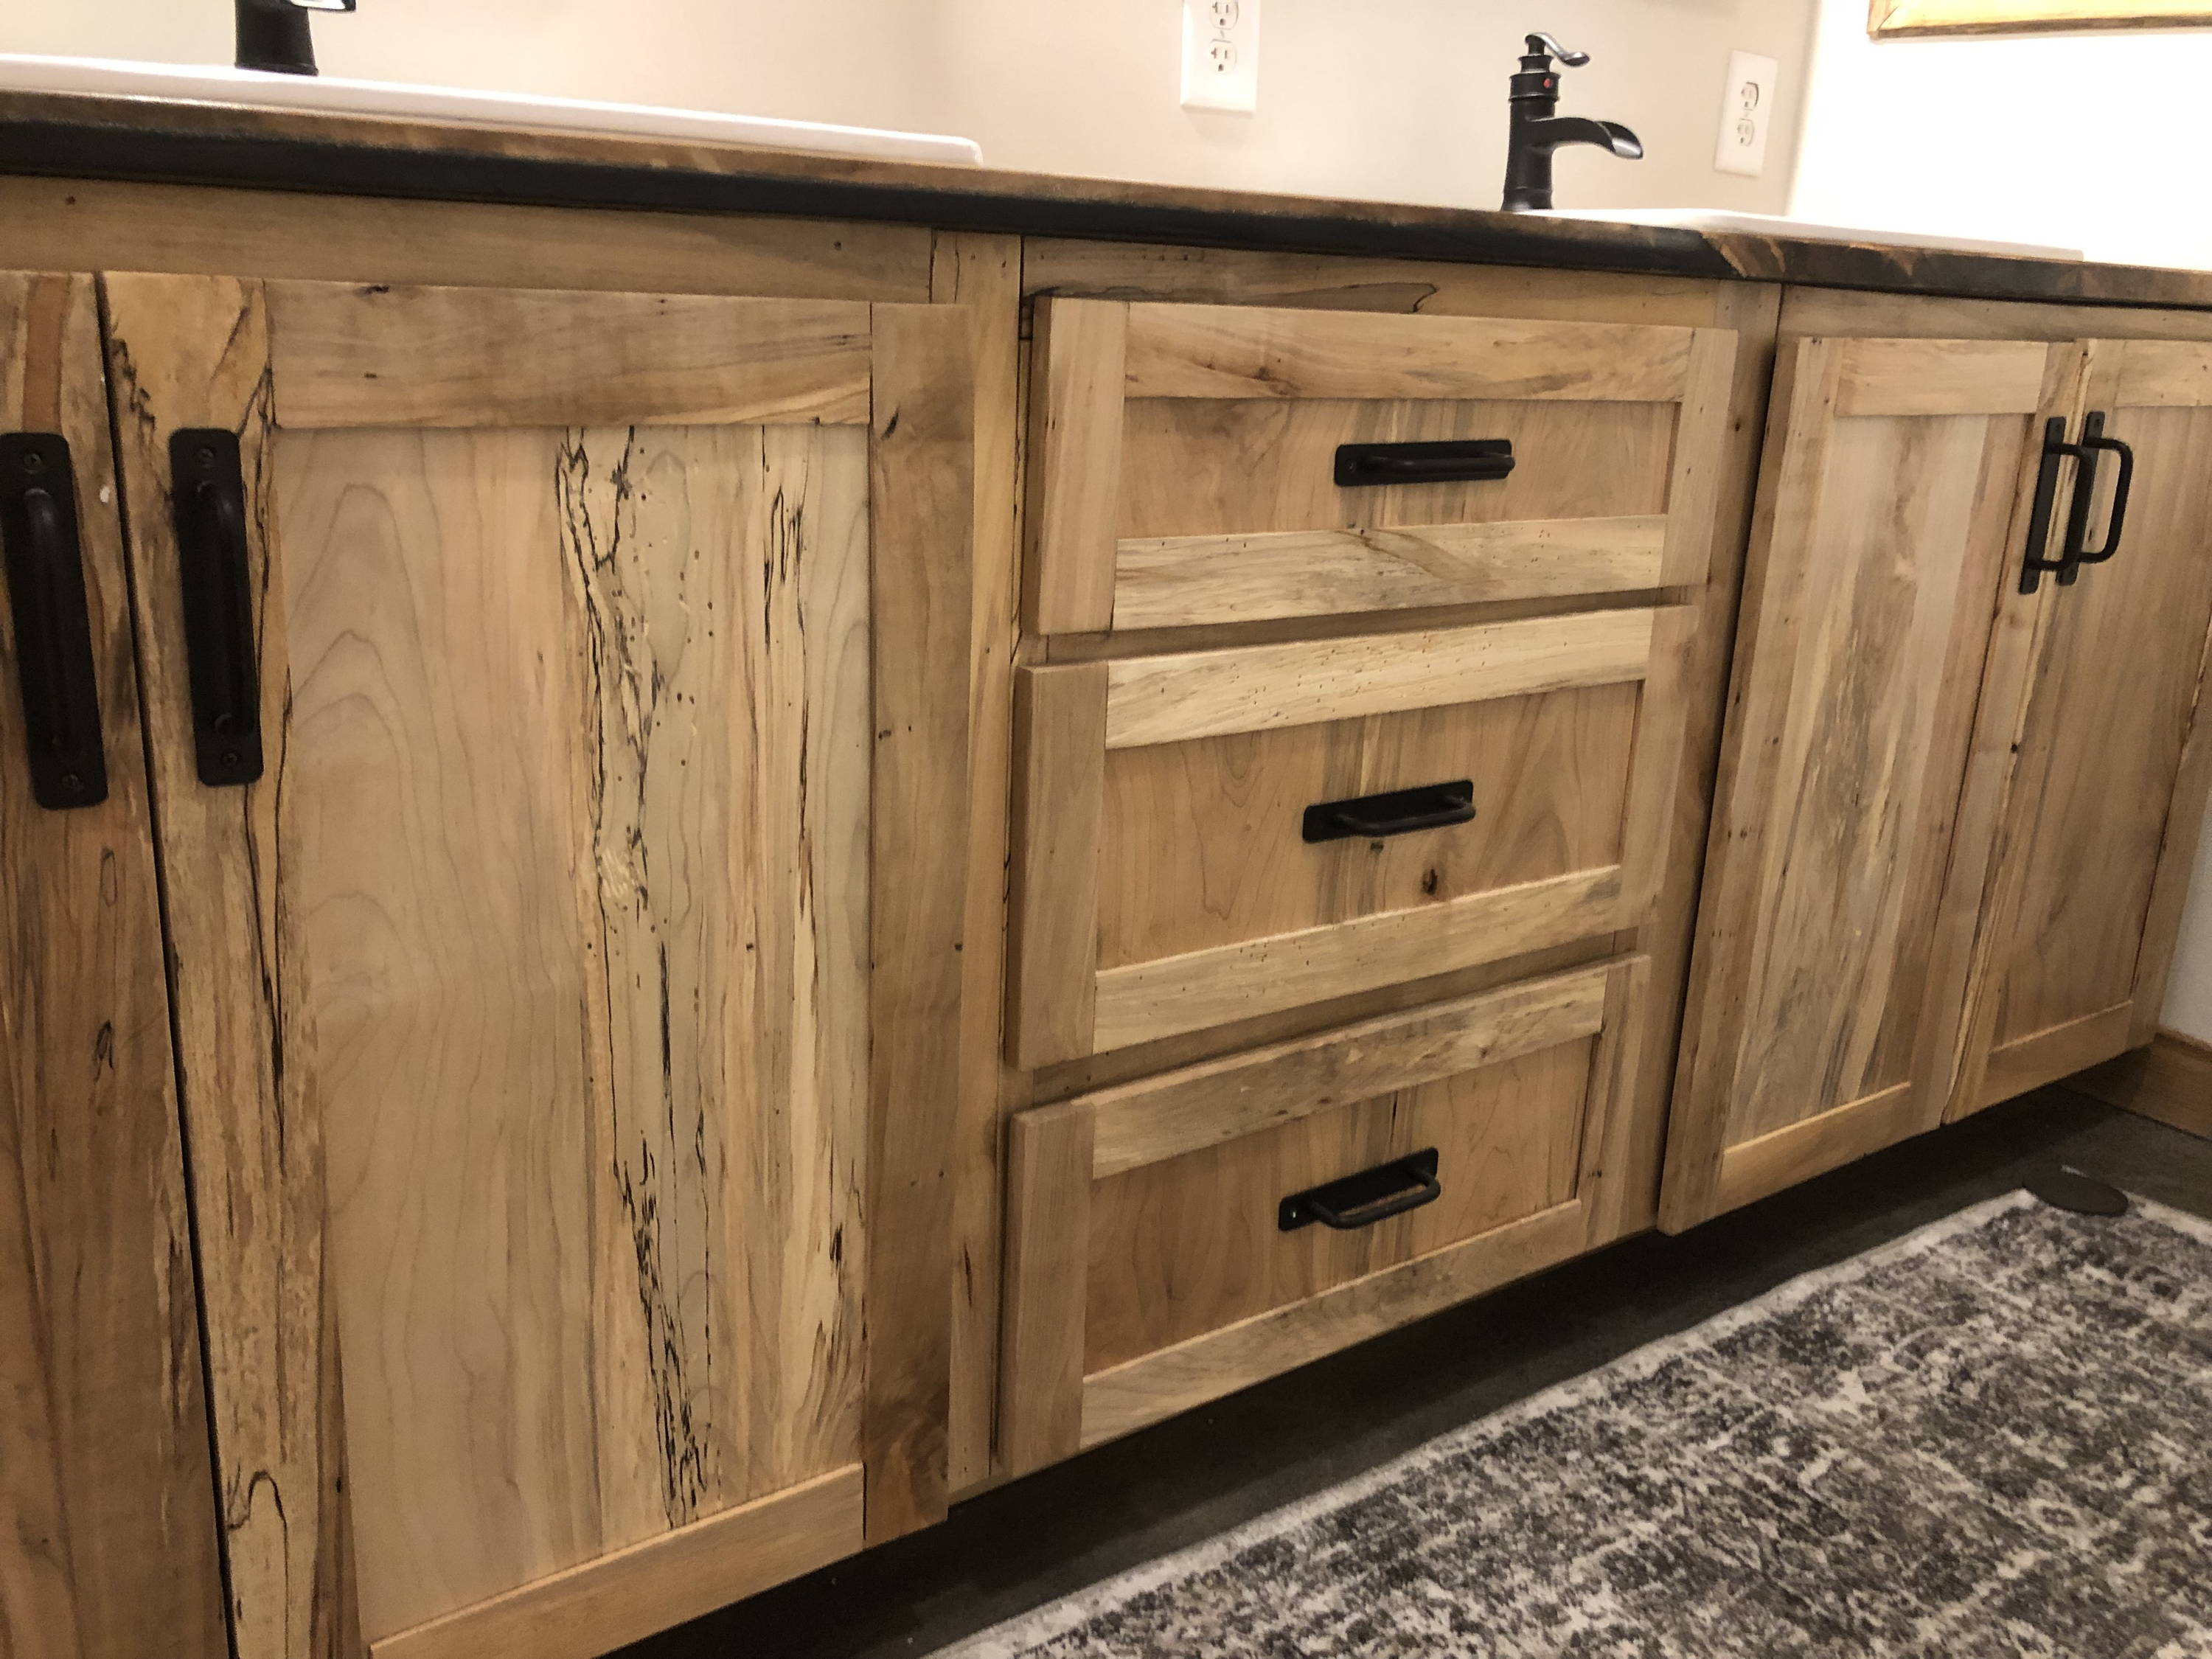 custom cabinets built from scratch